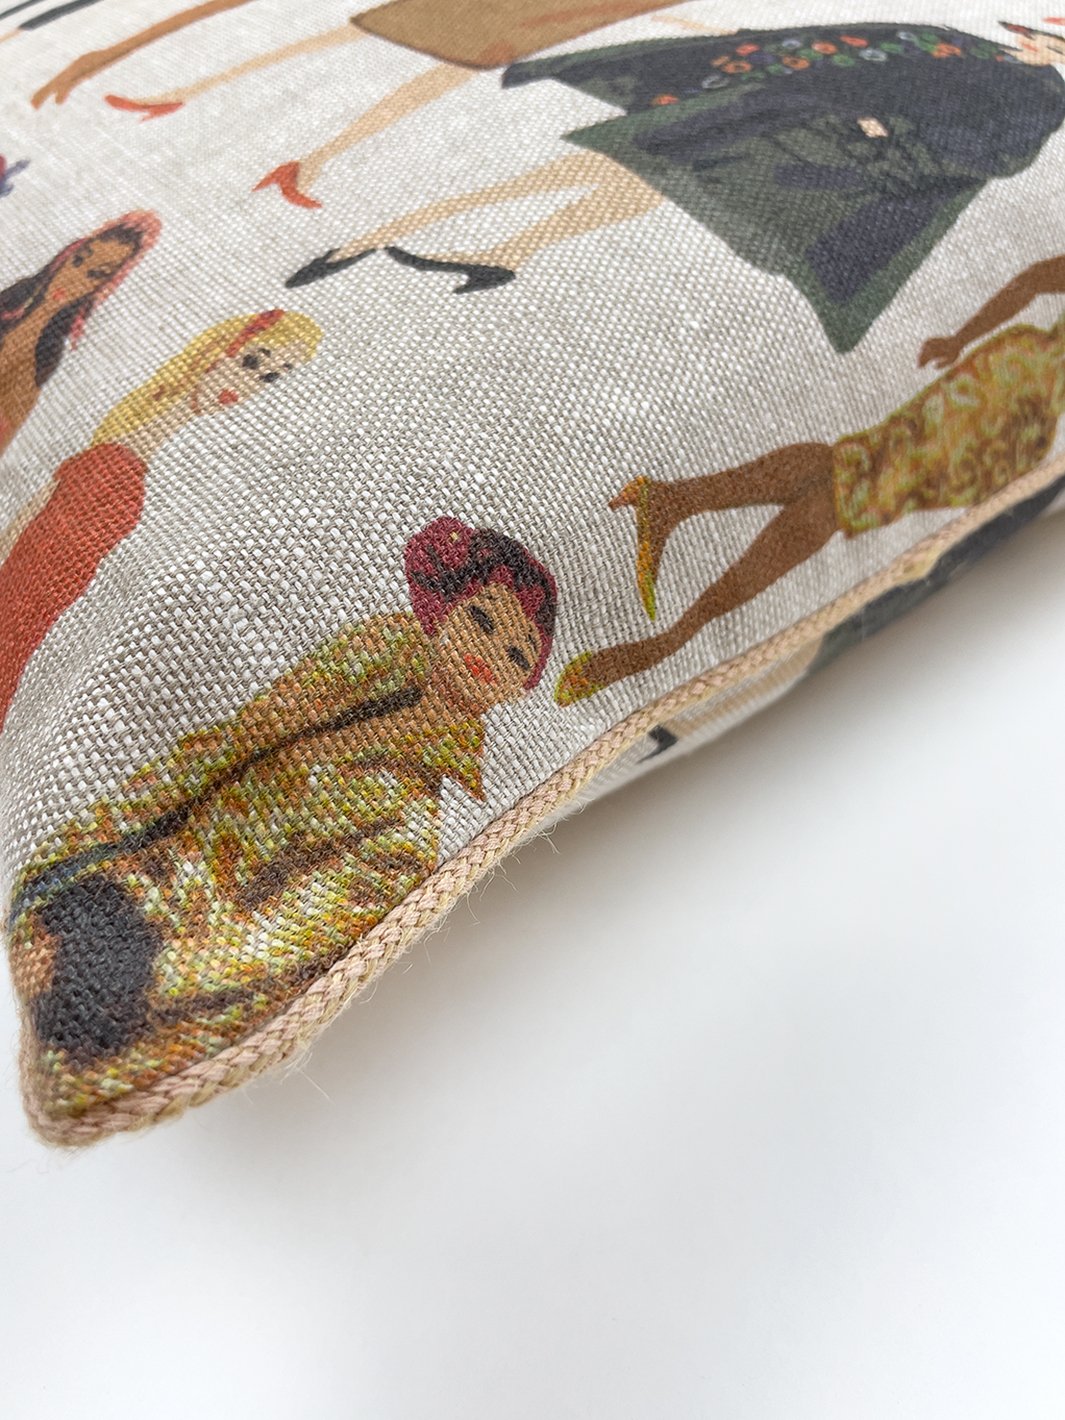 'Vintage Illustration' Throw Pillow by Barbie™ - Natural On Flax Linen